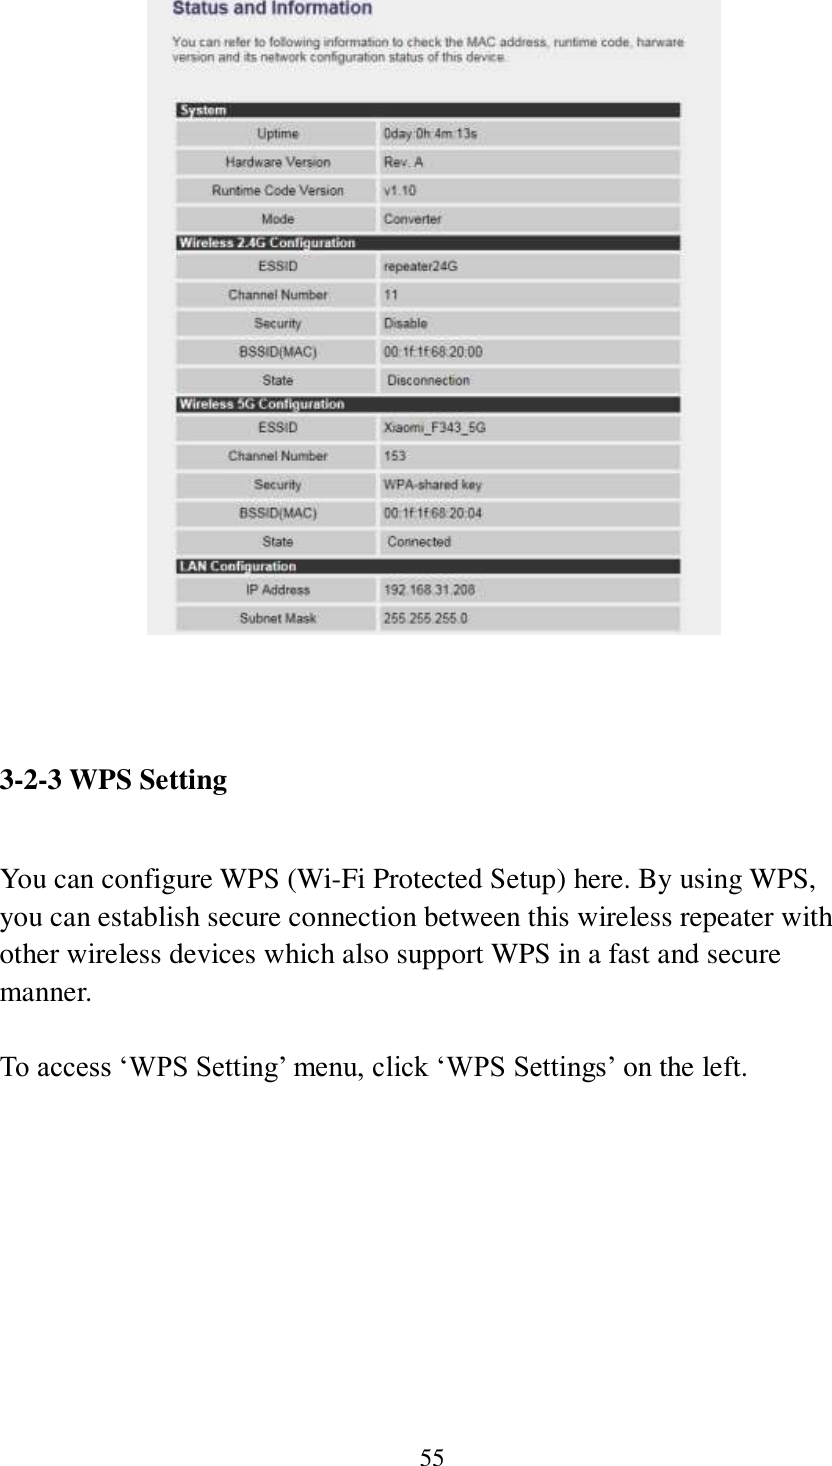 55     3-2-3 WPS Setting  You can configure WPS (Wi-Fi Protected Setup) here. By using WPS, you can establish secure connection between this wireless repeater with other wireless devices which also support WPS in a fast and secure manner.  To access ‘WPS Setting’ menu, click ‘WPS Settings’ on the left.  